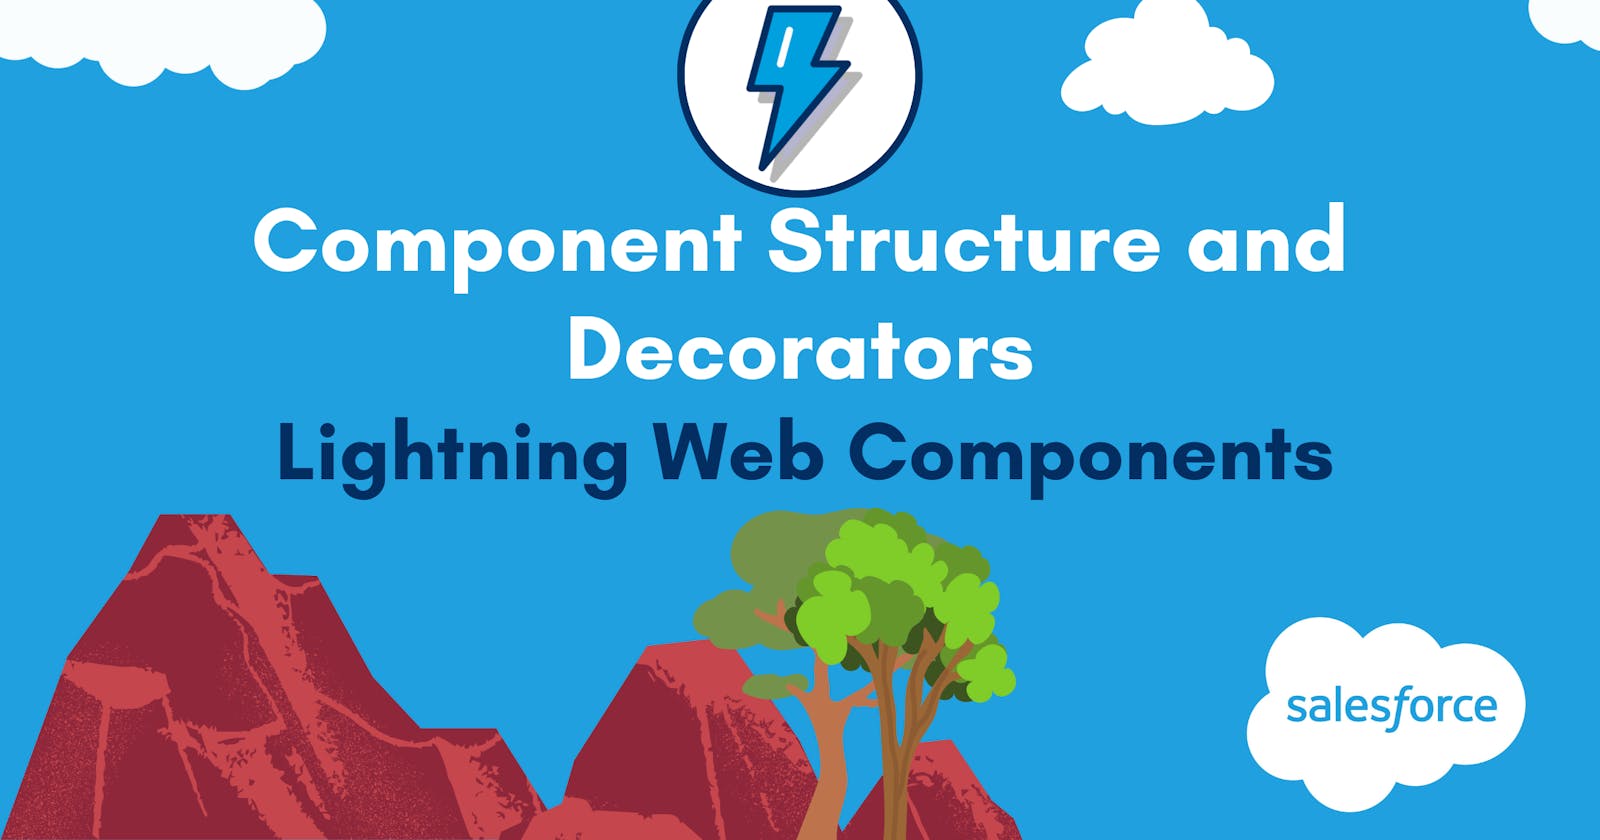 Component Structure and Decorators